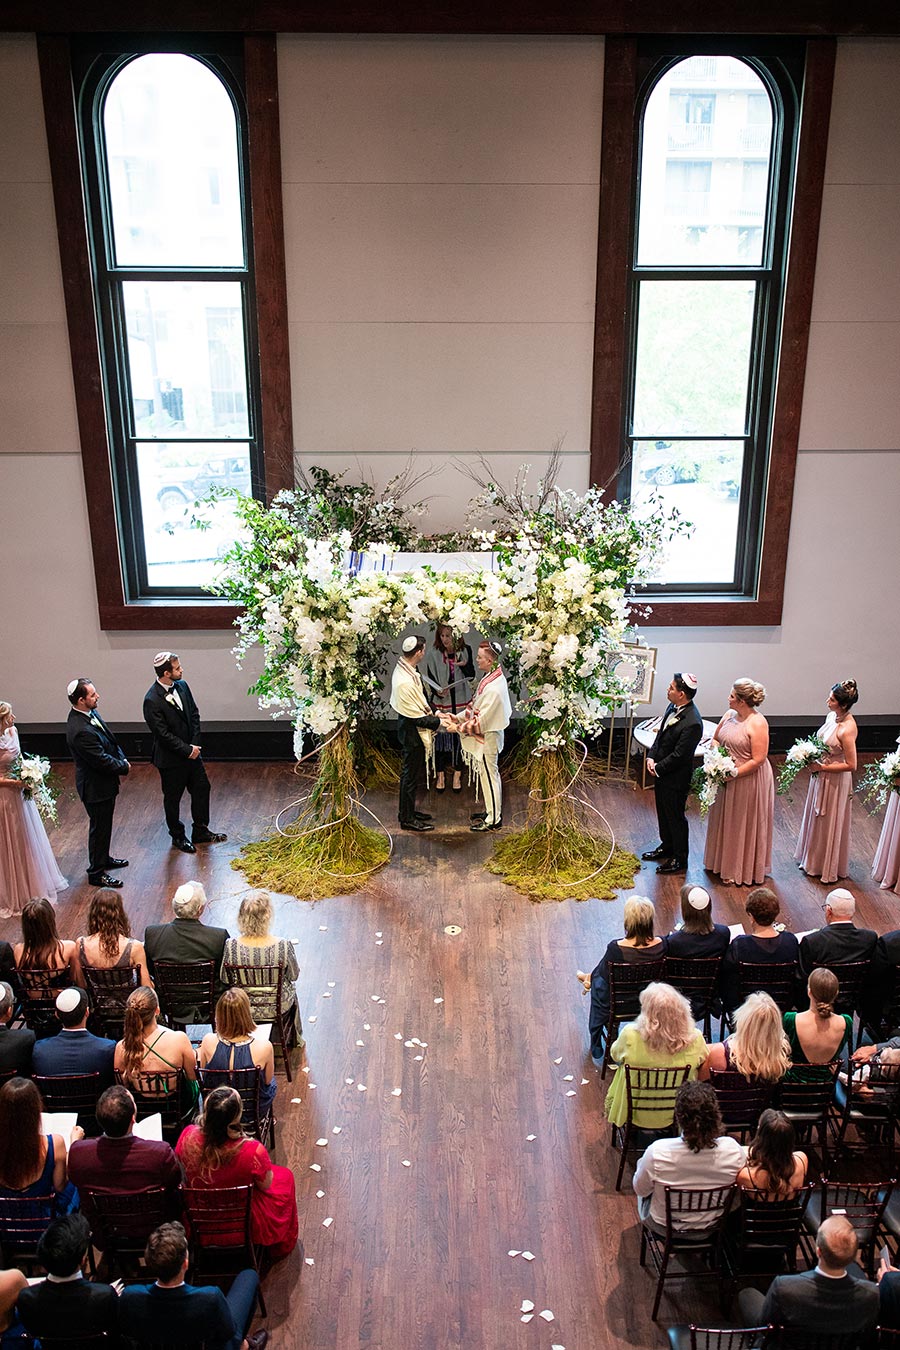 Jewish Ceremony Same-Sex Marriage with Whimsical Chuppah of White Florals, Greenery, Branches, and Moss | Chuppah Inspiration| Wedding Ceremony at The Bell Tower in Nashville, TN